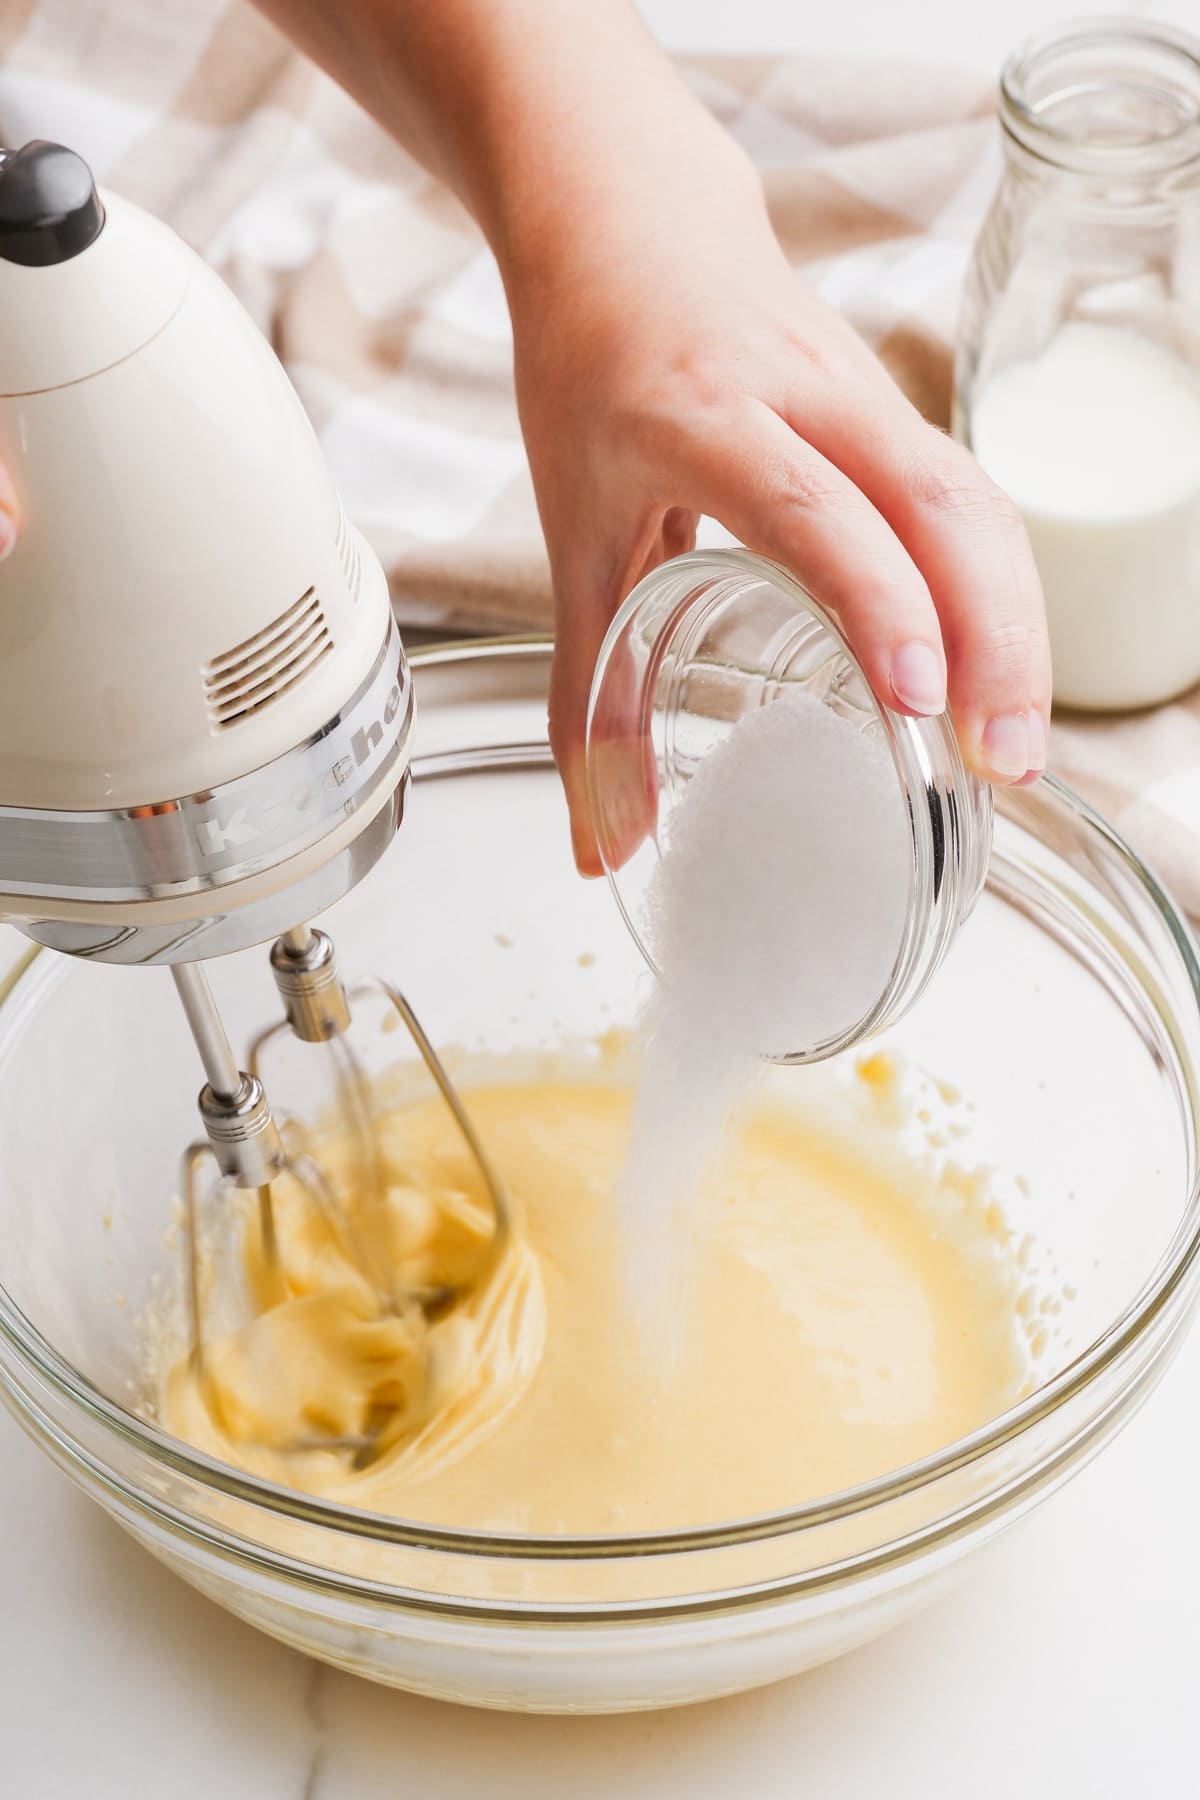 cake batter with woman's hand adding sugar while mixing